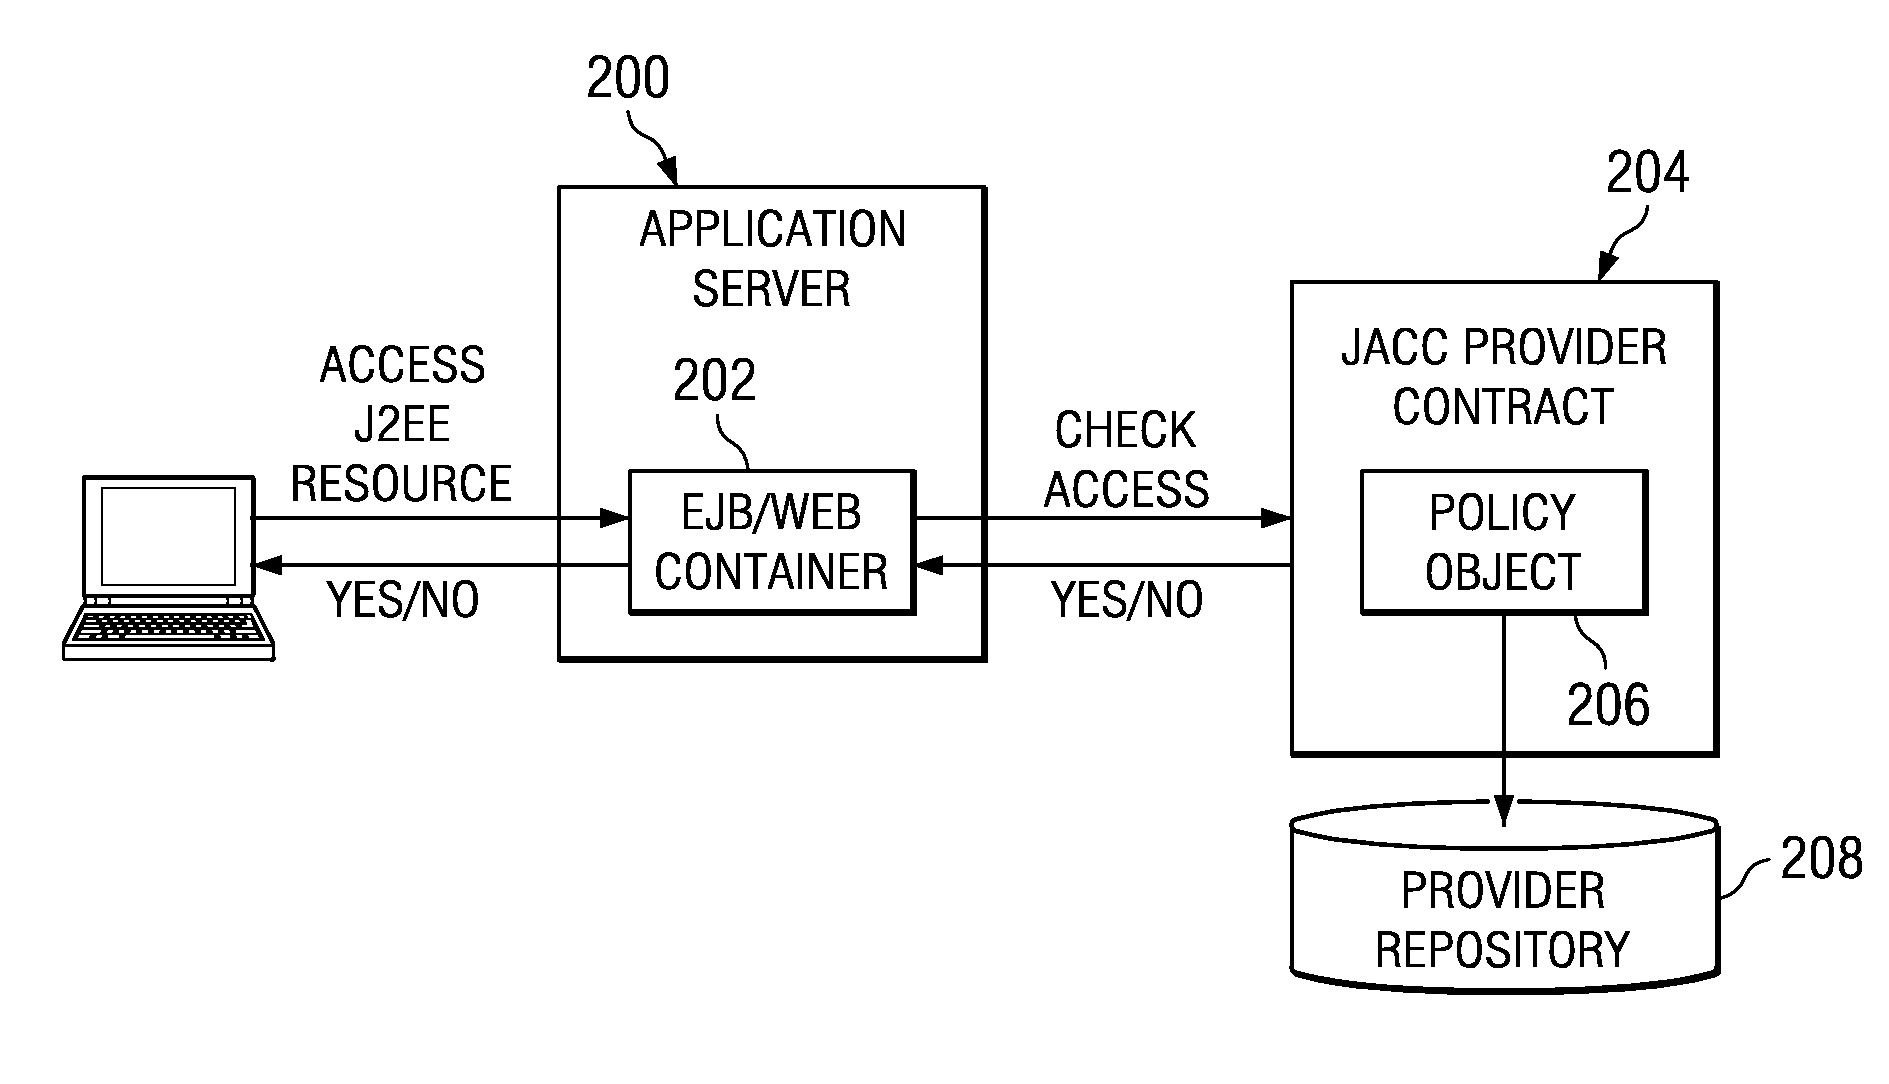 Role-based authorization using conditional permissions